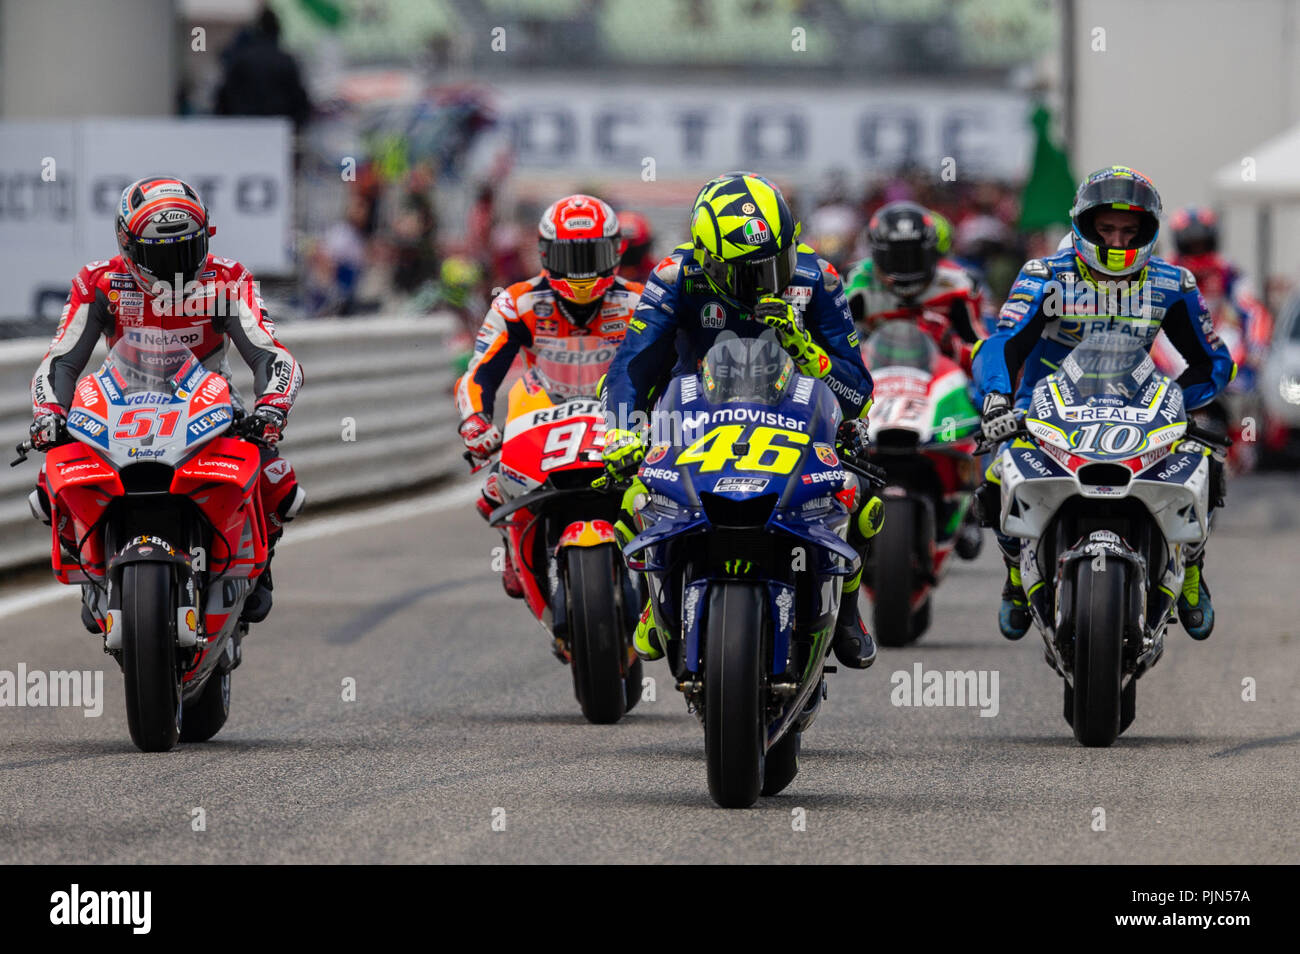 Misano Adriatico, Italy. 07th Sep, 2018. MotoGP riders during Friday FP2 in Misano Credit: Lorenzo Di Cola/Pacific Press/Alamy Live News Stock Photo